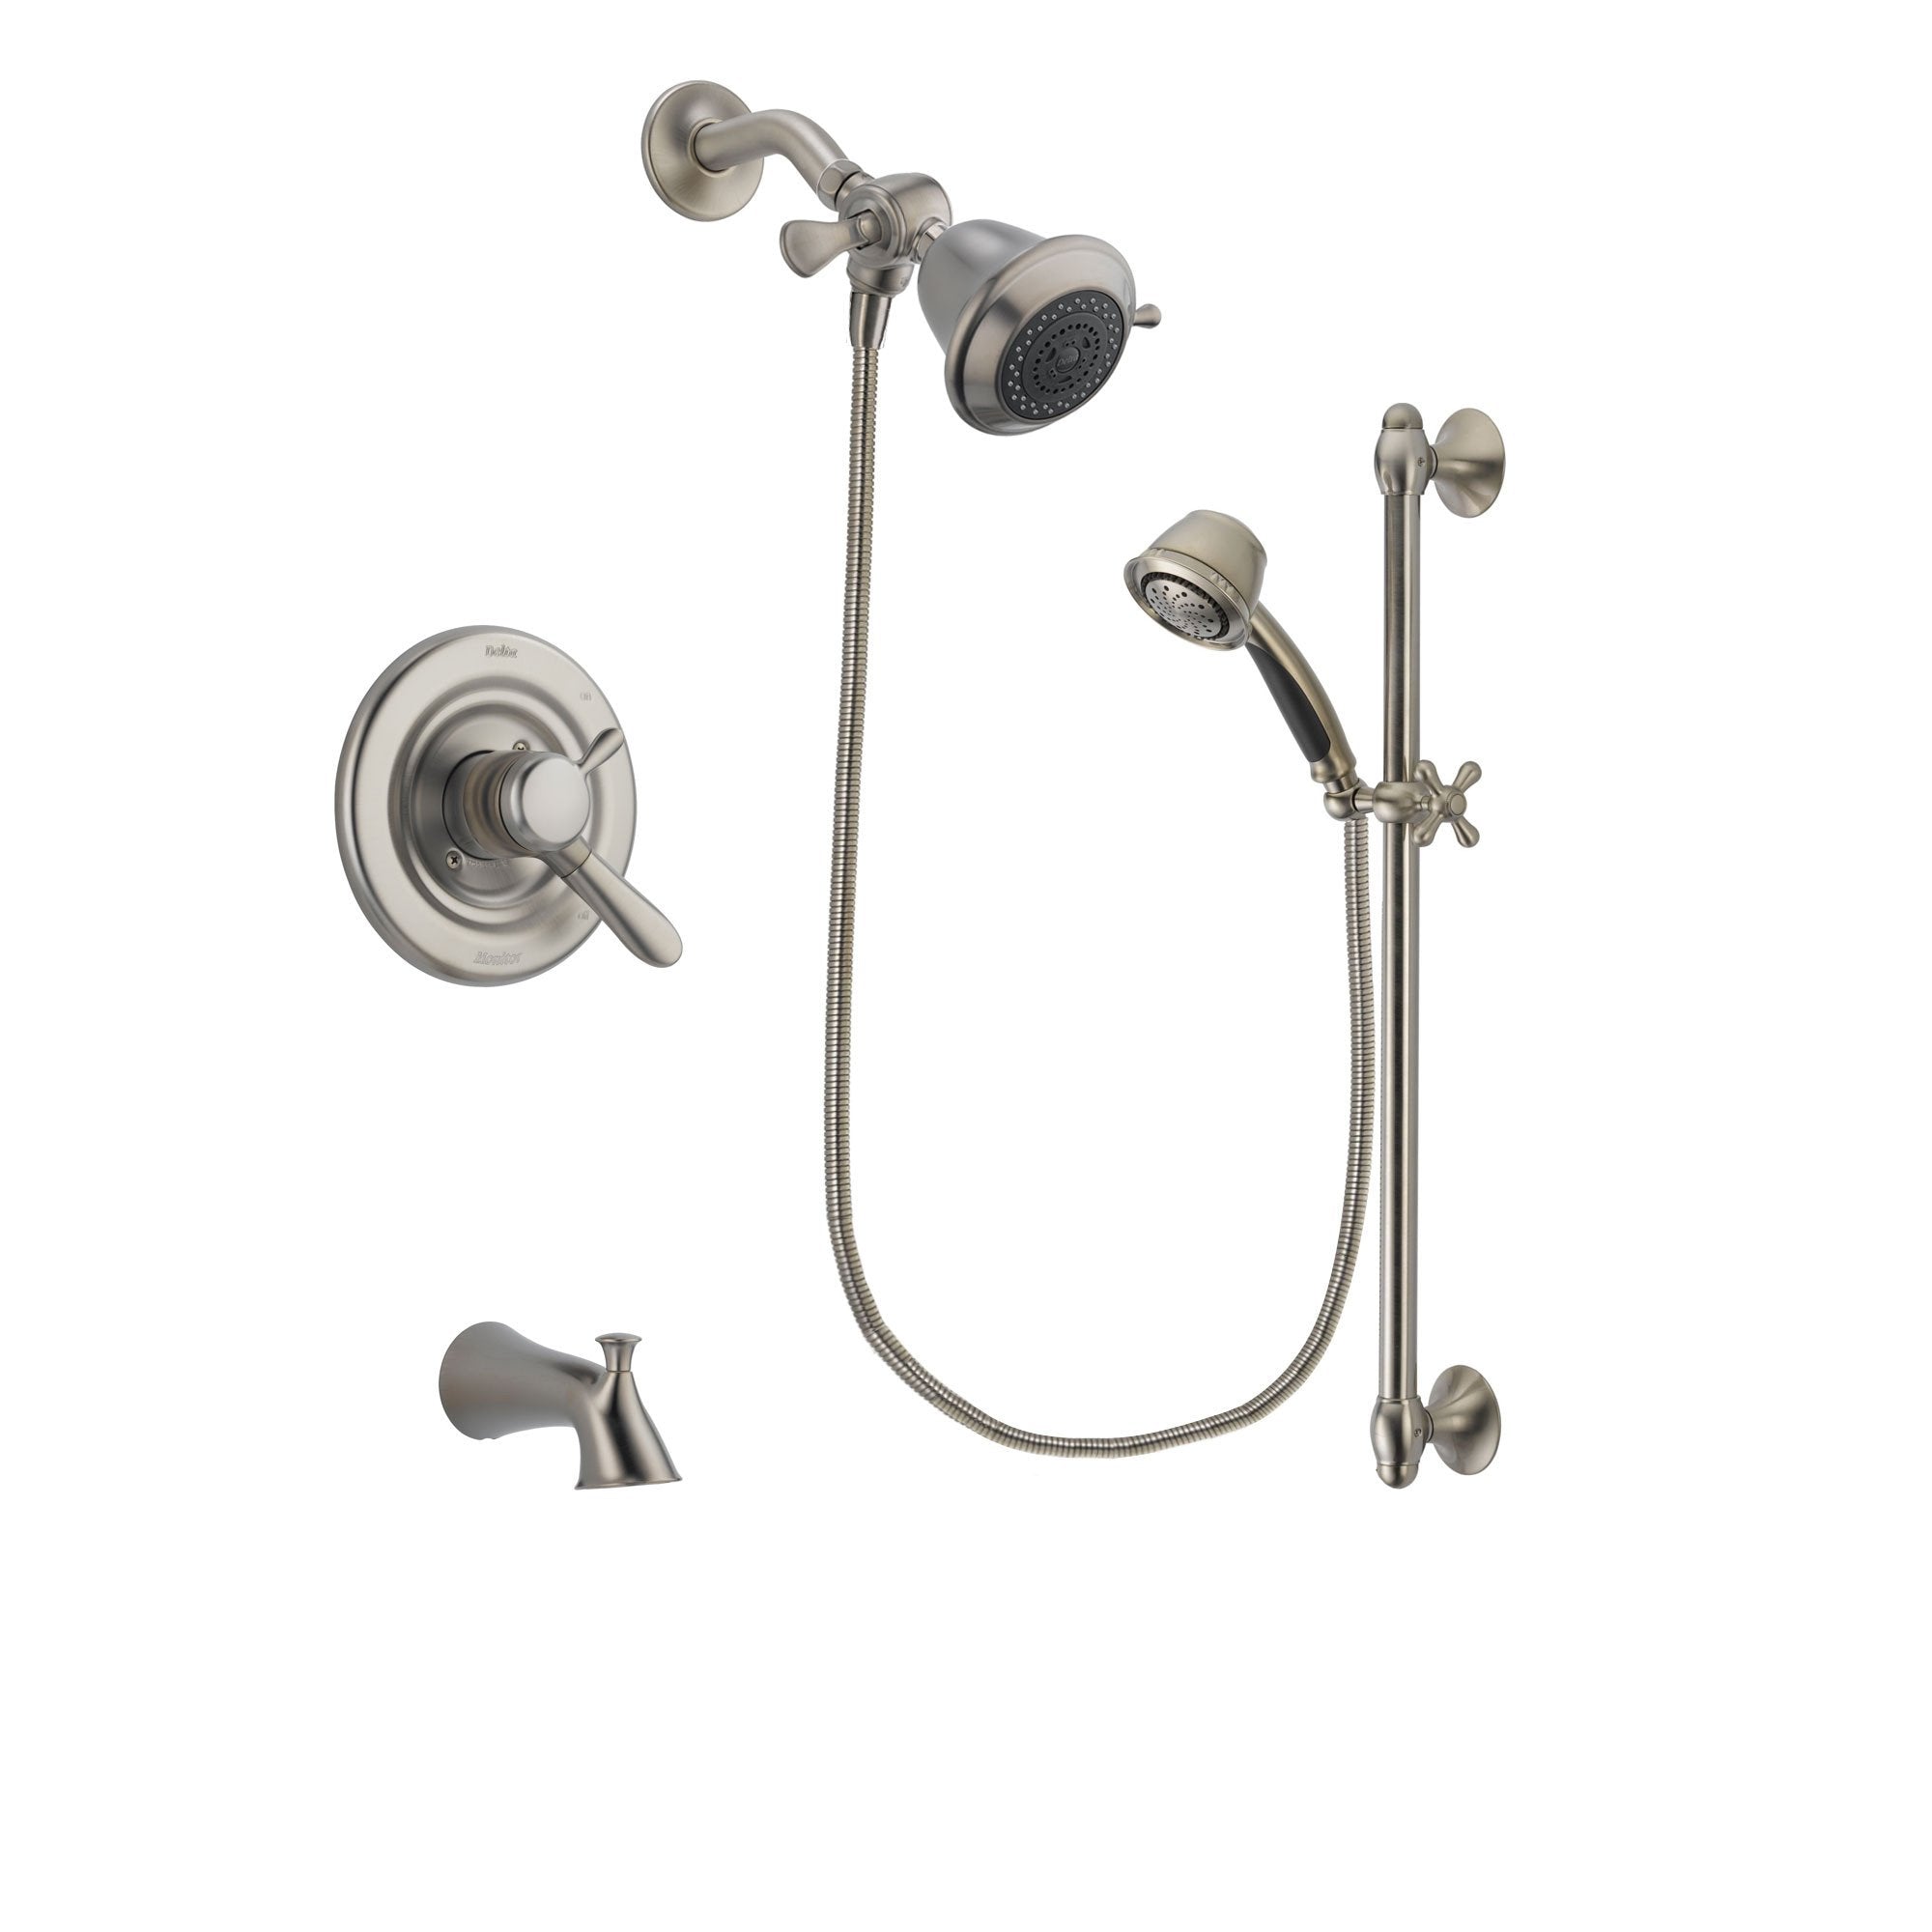 Delta Lahara Stainless Steel Finish Dual Control Tub and Shower Faucet System Package with Shower Head and 5-Spray Personal Handshower with Slide Bar Includes Rough-in Valve and Tub Spout DSP1261V